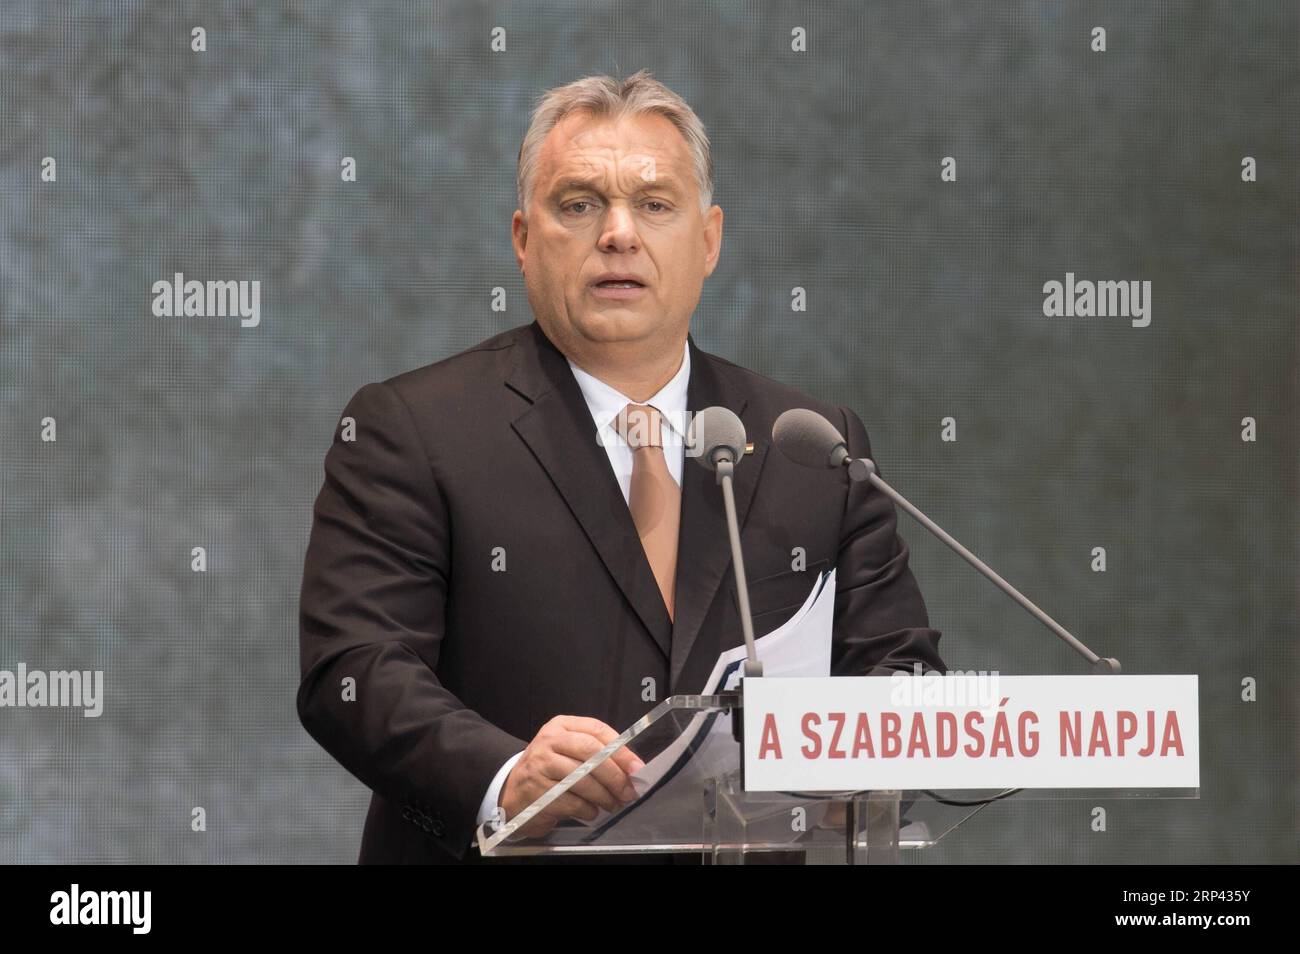 (181024) -- BUDAPEST, Oct. 24, 2018 -- Hungarian Prime Minister Viktor Orban delivers a speech during the National Day commemorating the 1956 revolution in Budapest, Hungary, on Oct. 23, 2018. Europe s strength has always been provided by the nation states of the continent, Hungarian Prime Minister Viktor Orban said here on Wednesday. ) (yy) HUNGARY-BUDAPEST-NATIONAL DAY-PM-SPEECH AttilaxVolgyi PUBLICATIONxNOTxINxCHN Stock Photo